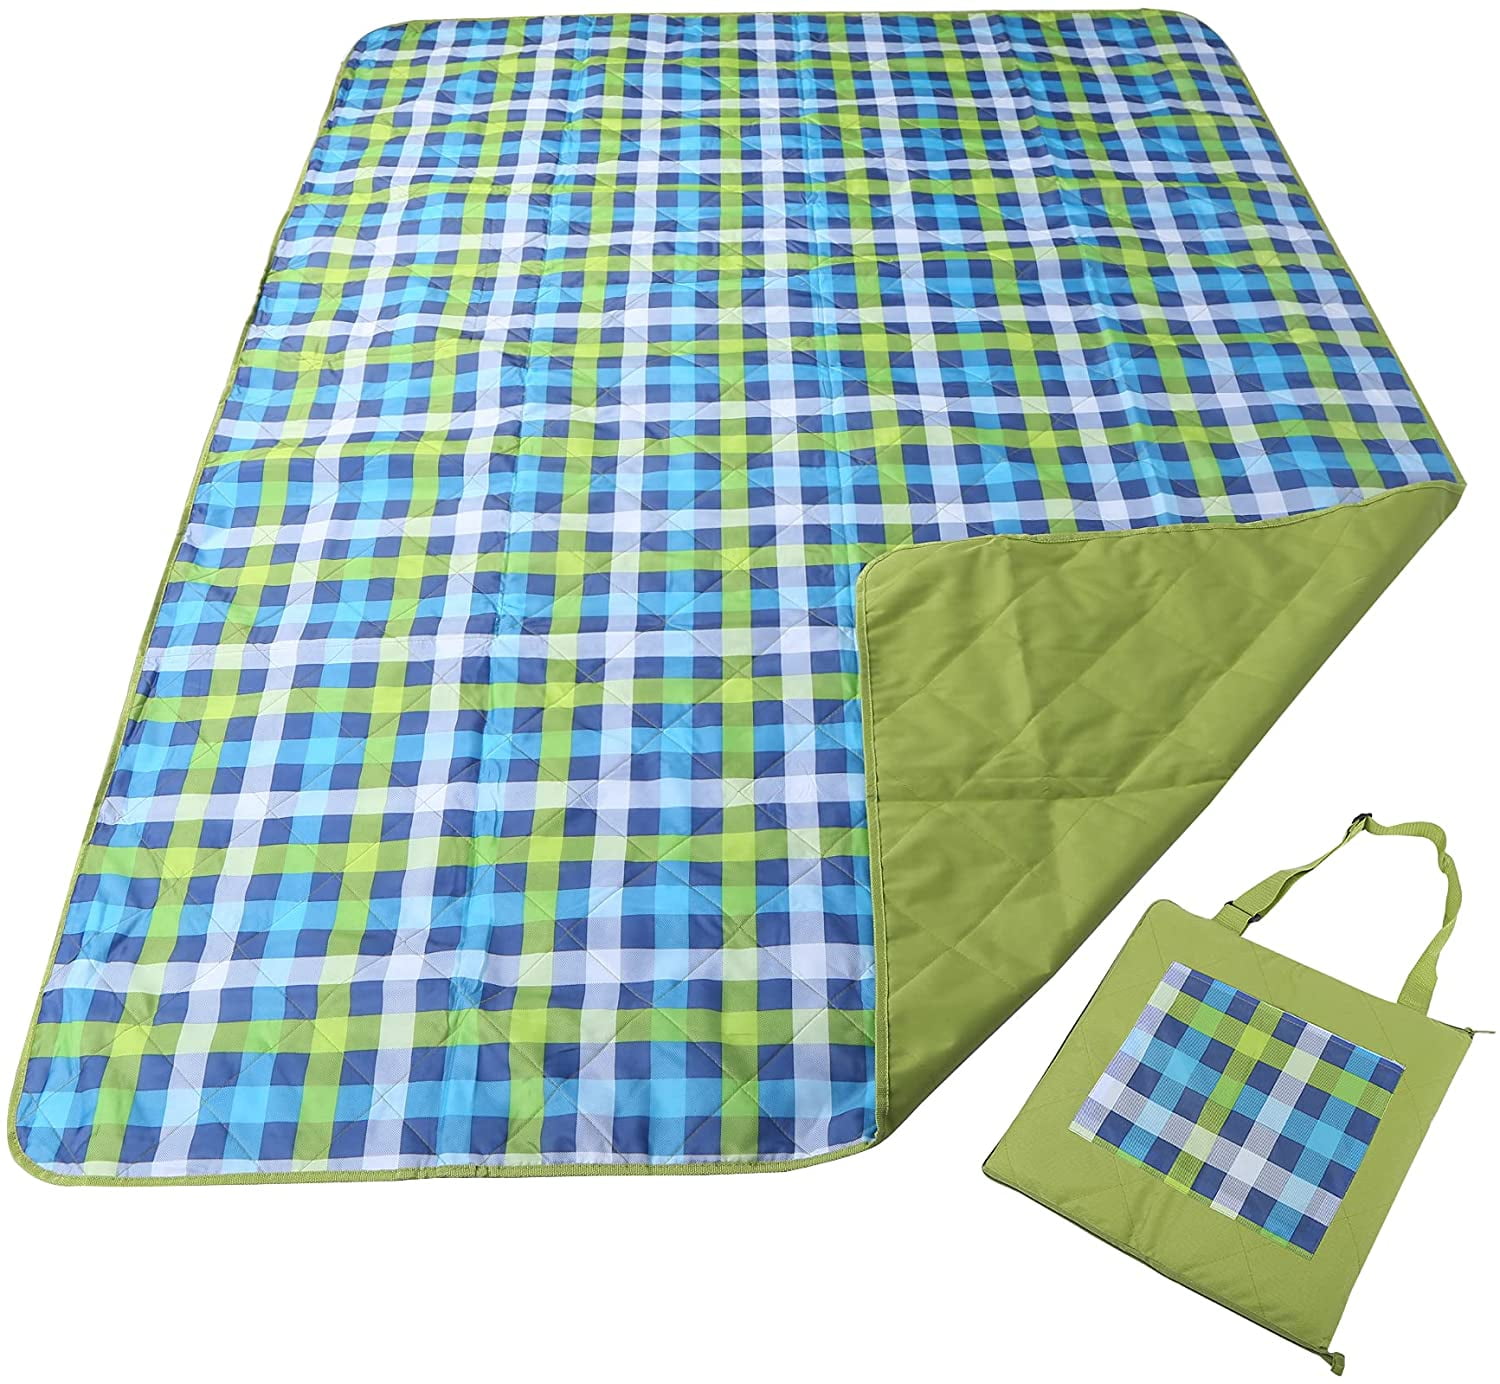 REDCAMP Outdoor Waterproof Picnic Blanket,Foldable Picnic Mat Green and Blue Plaid / 79x59